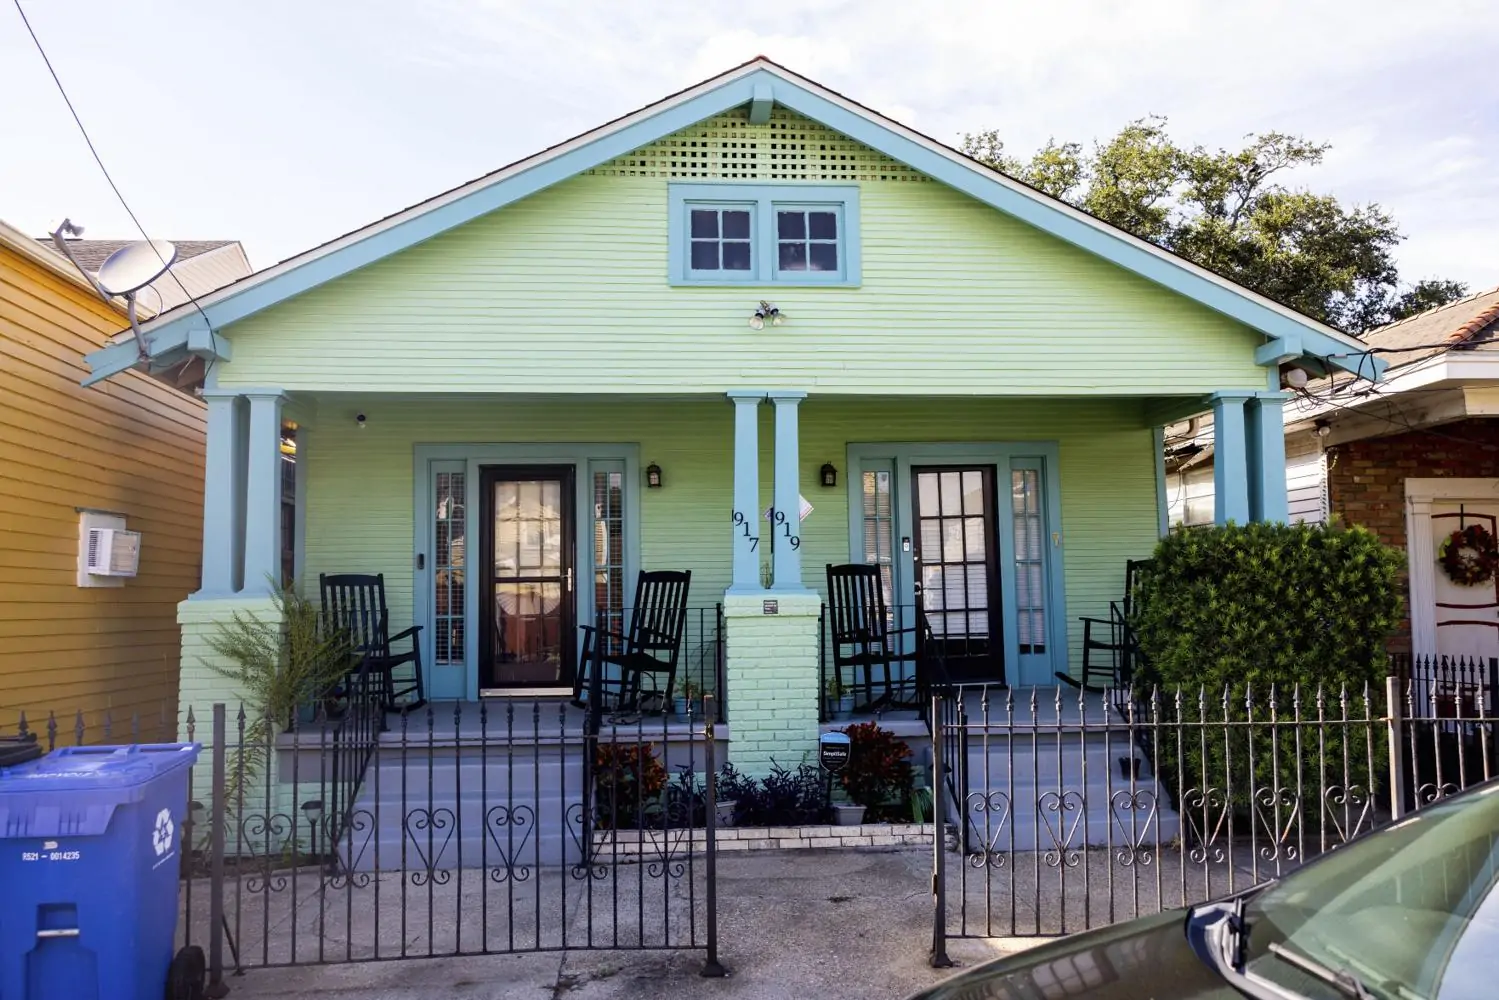 Oretha Castle Haley’s New Orleans Home, a Civil Rights Movement Hub, Listed on National Register